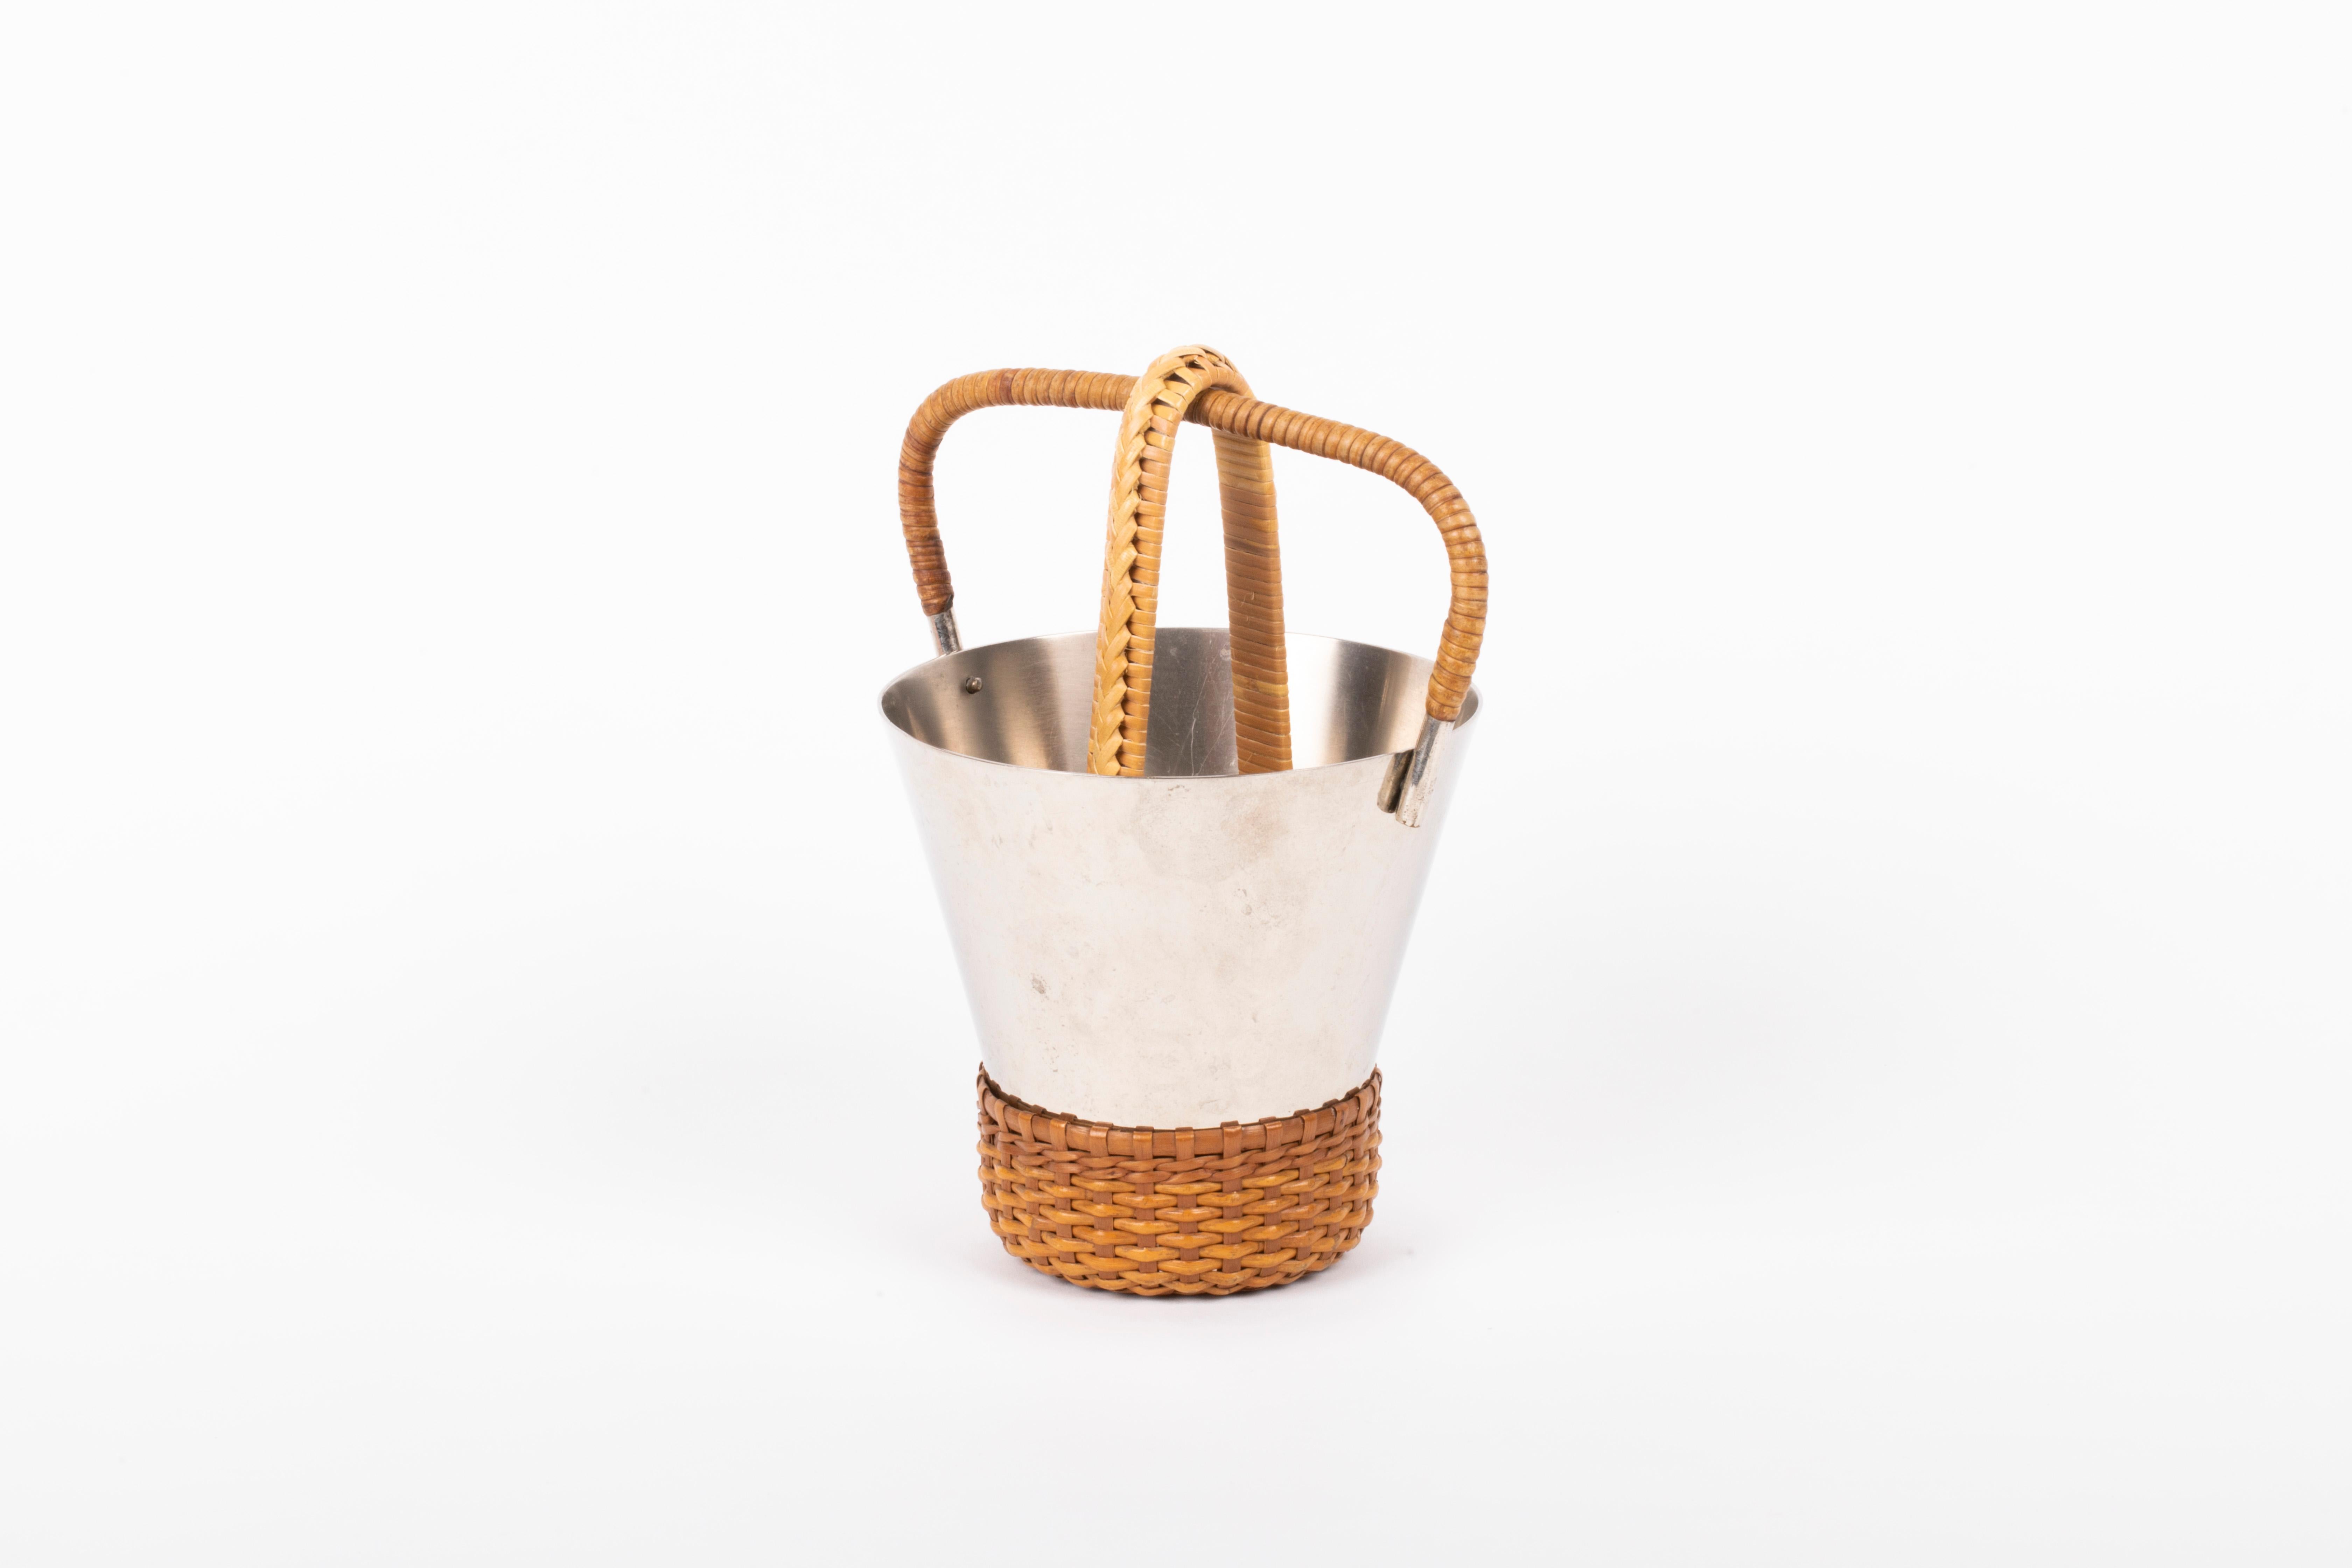 Carl Auböck set of ice bucket and tong, Austria 1960s. The measurements given apply to the ice bucket (height with the handle is 16cm). The tong measures 5cm-15cm-1,5cm.